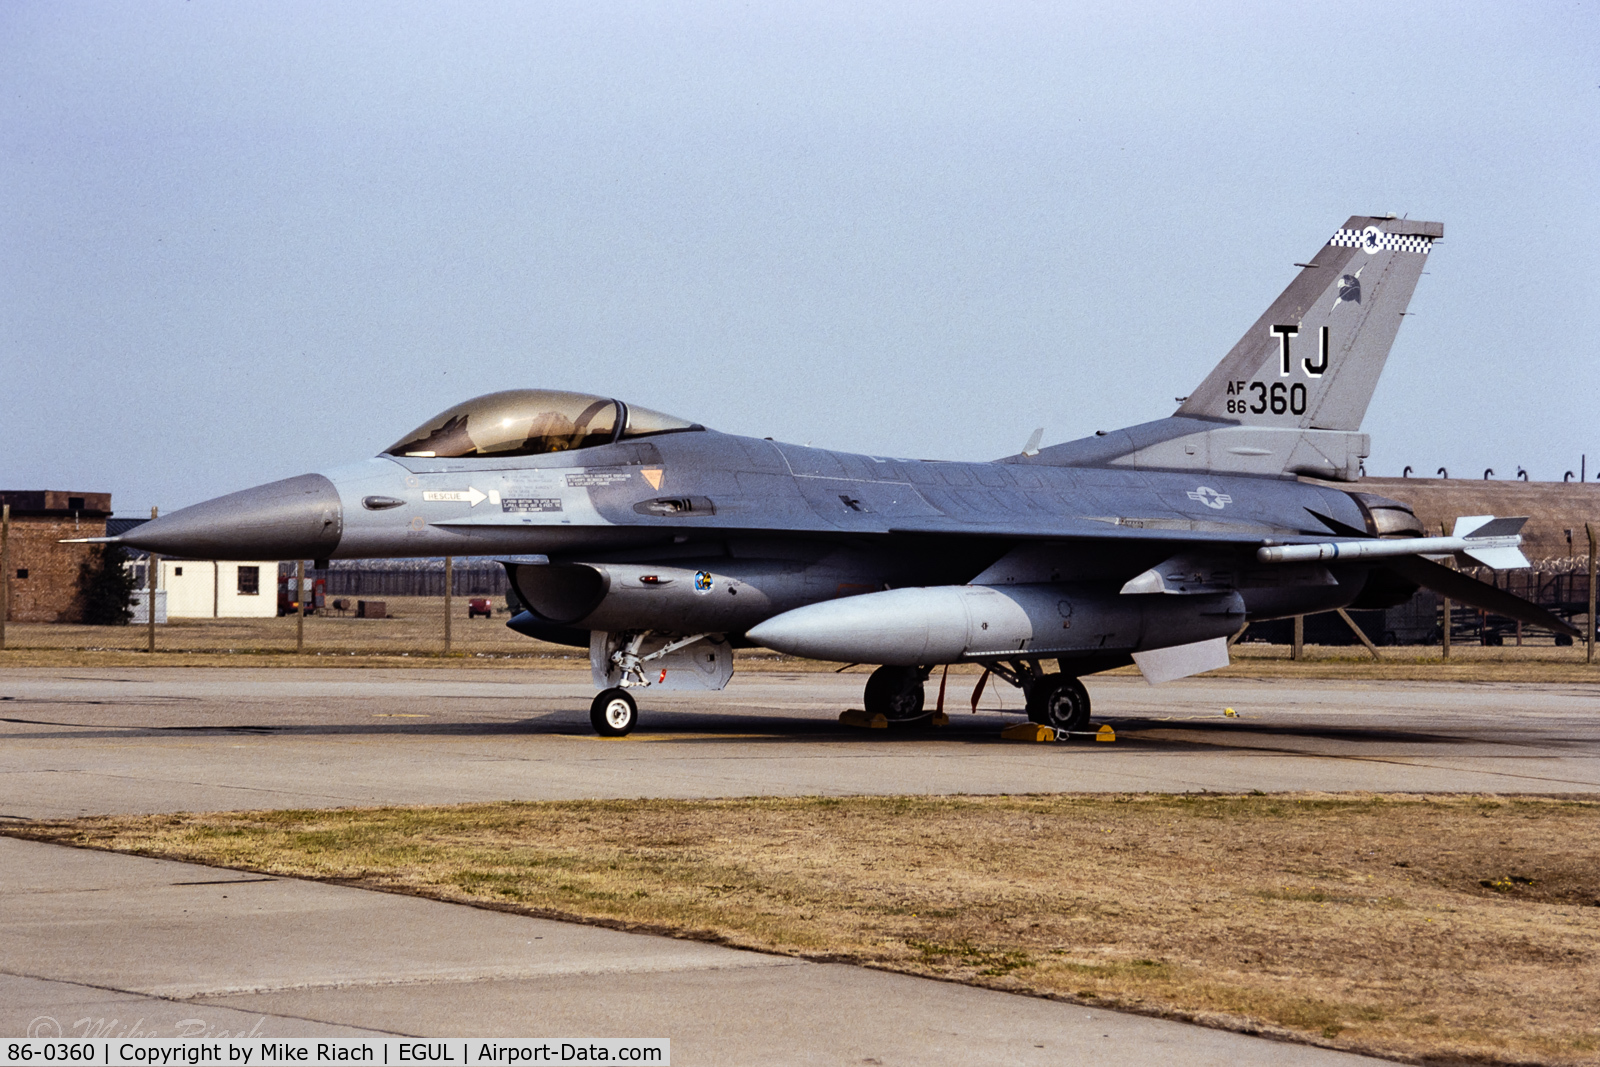 86-0360, 1986 General Dynamics F-16C Fighting Falcon C/N 5C-466, Photographed at Lakenheath during the Excalibur exercise in July 1990